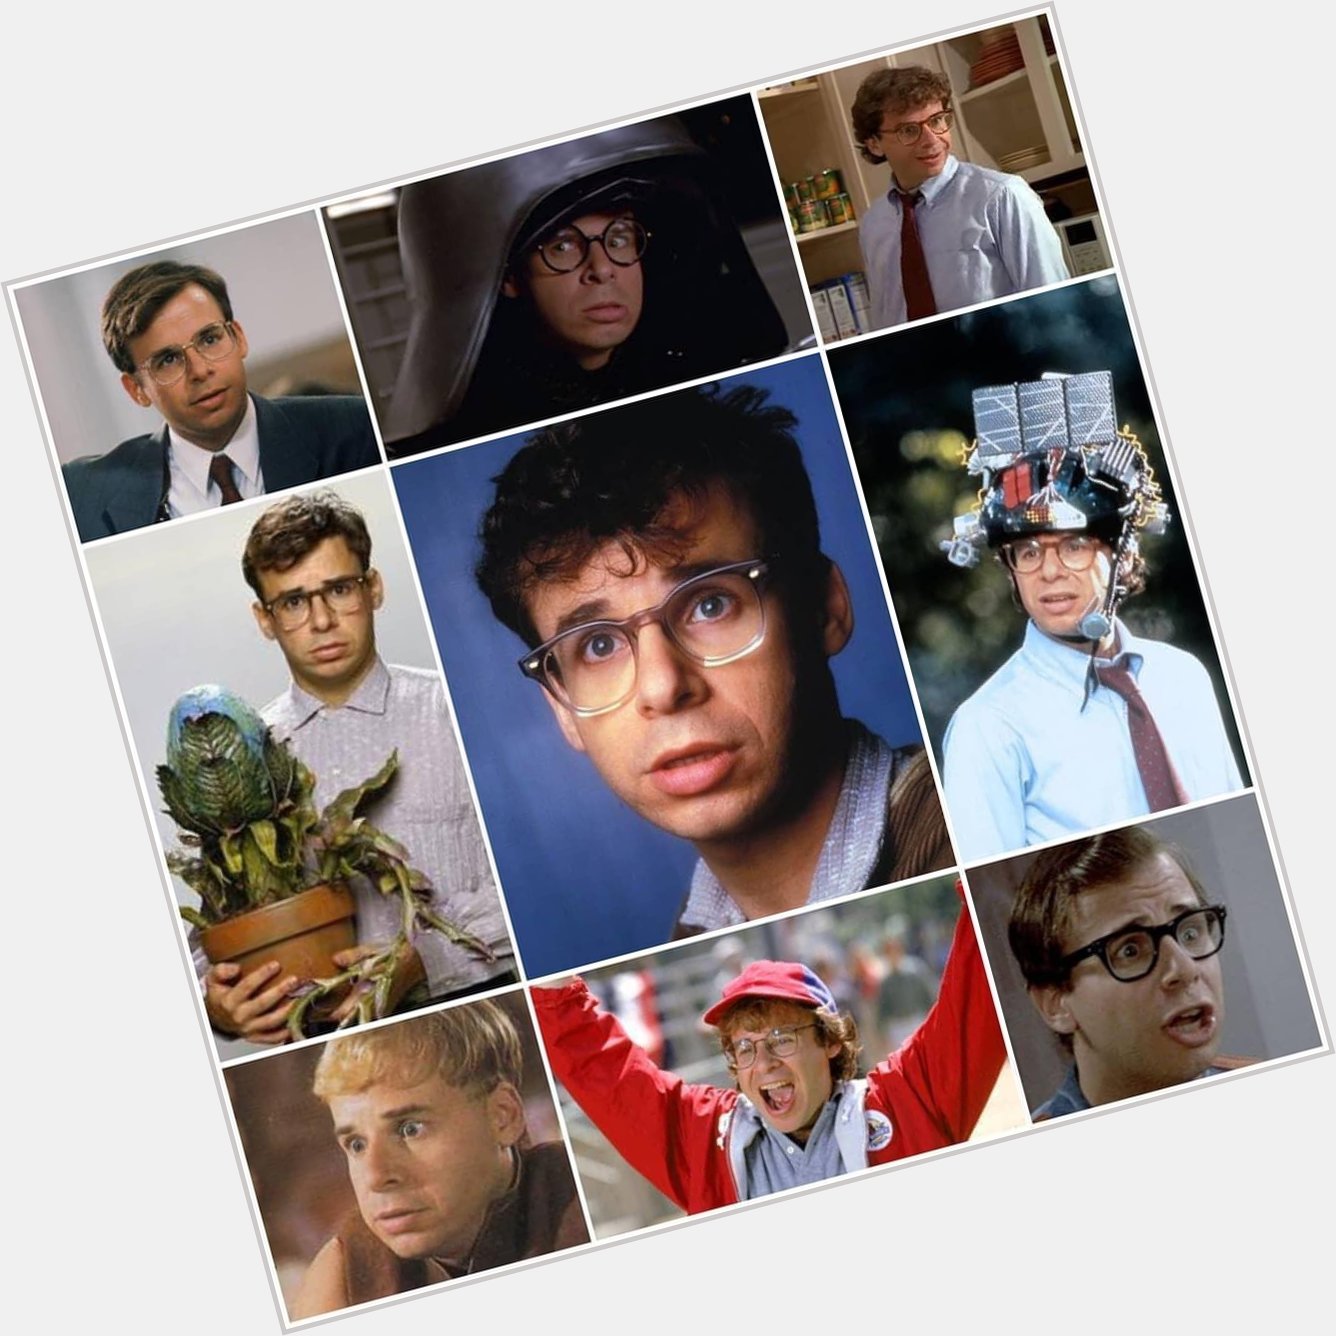 Happy 70th birthday to Rick Moranis a great day to celebrate his comedic genius. 